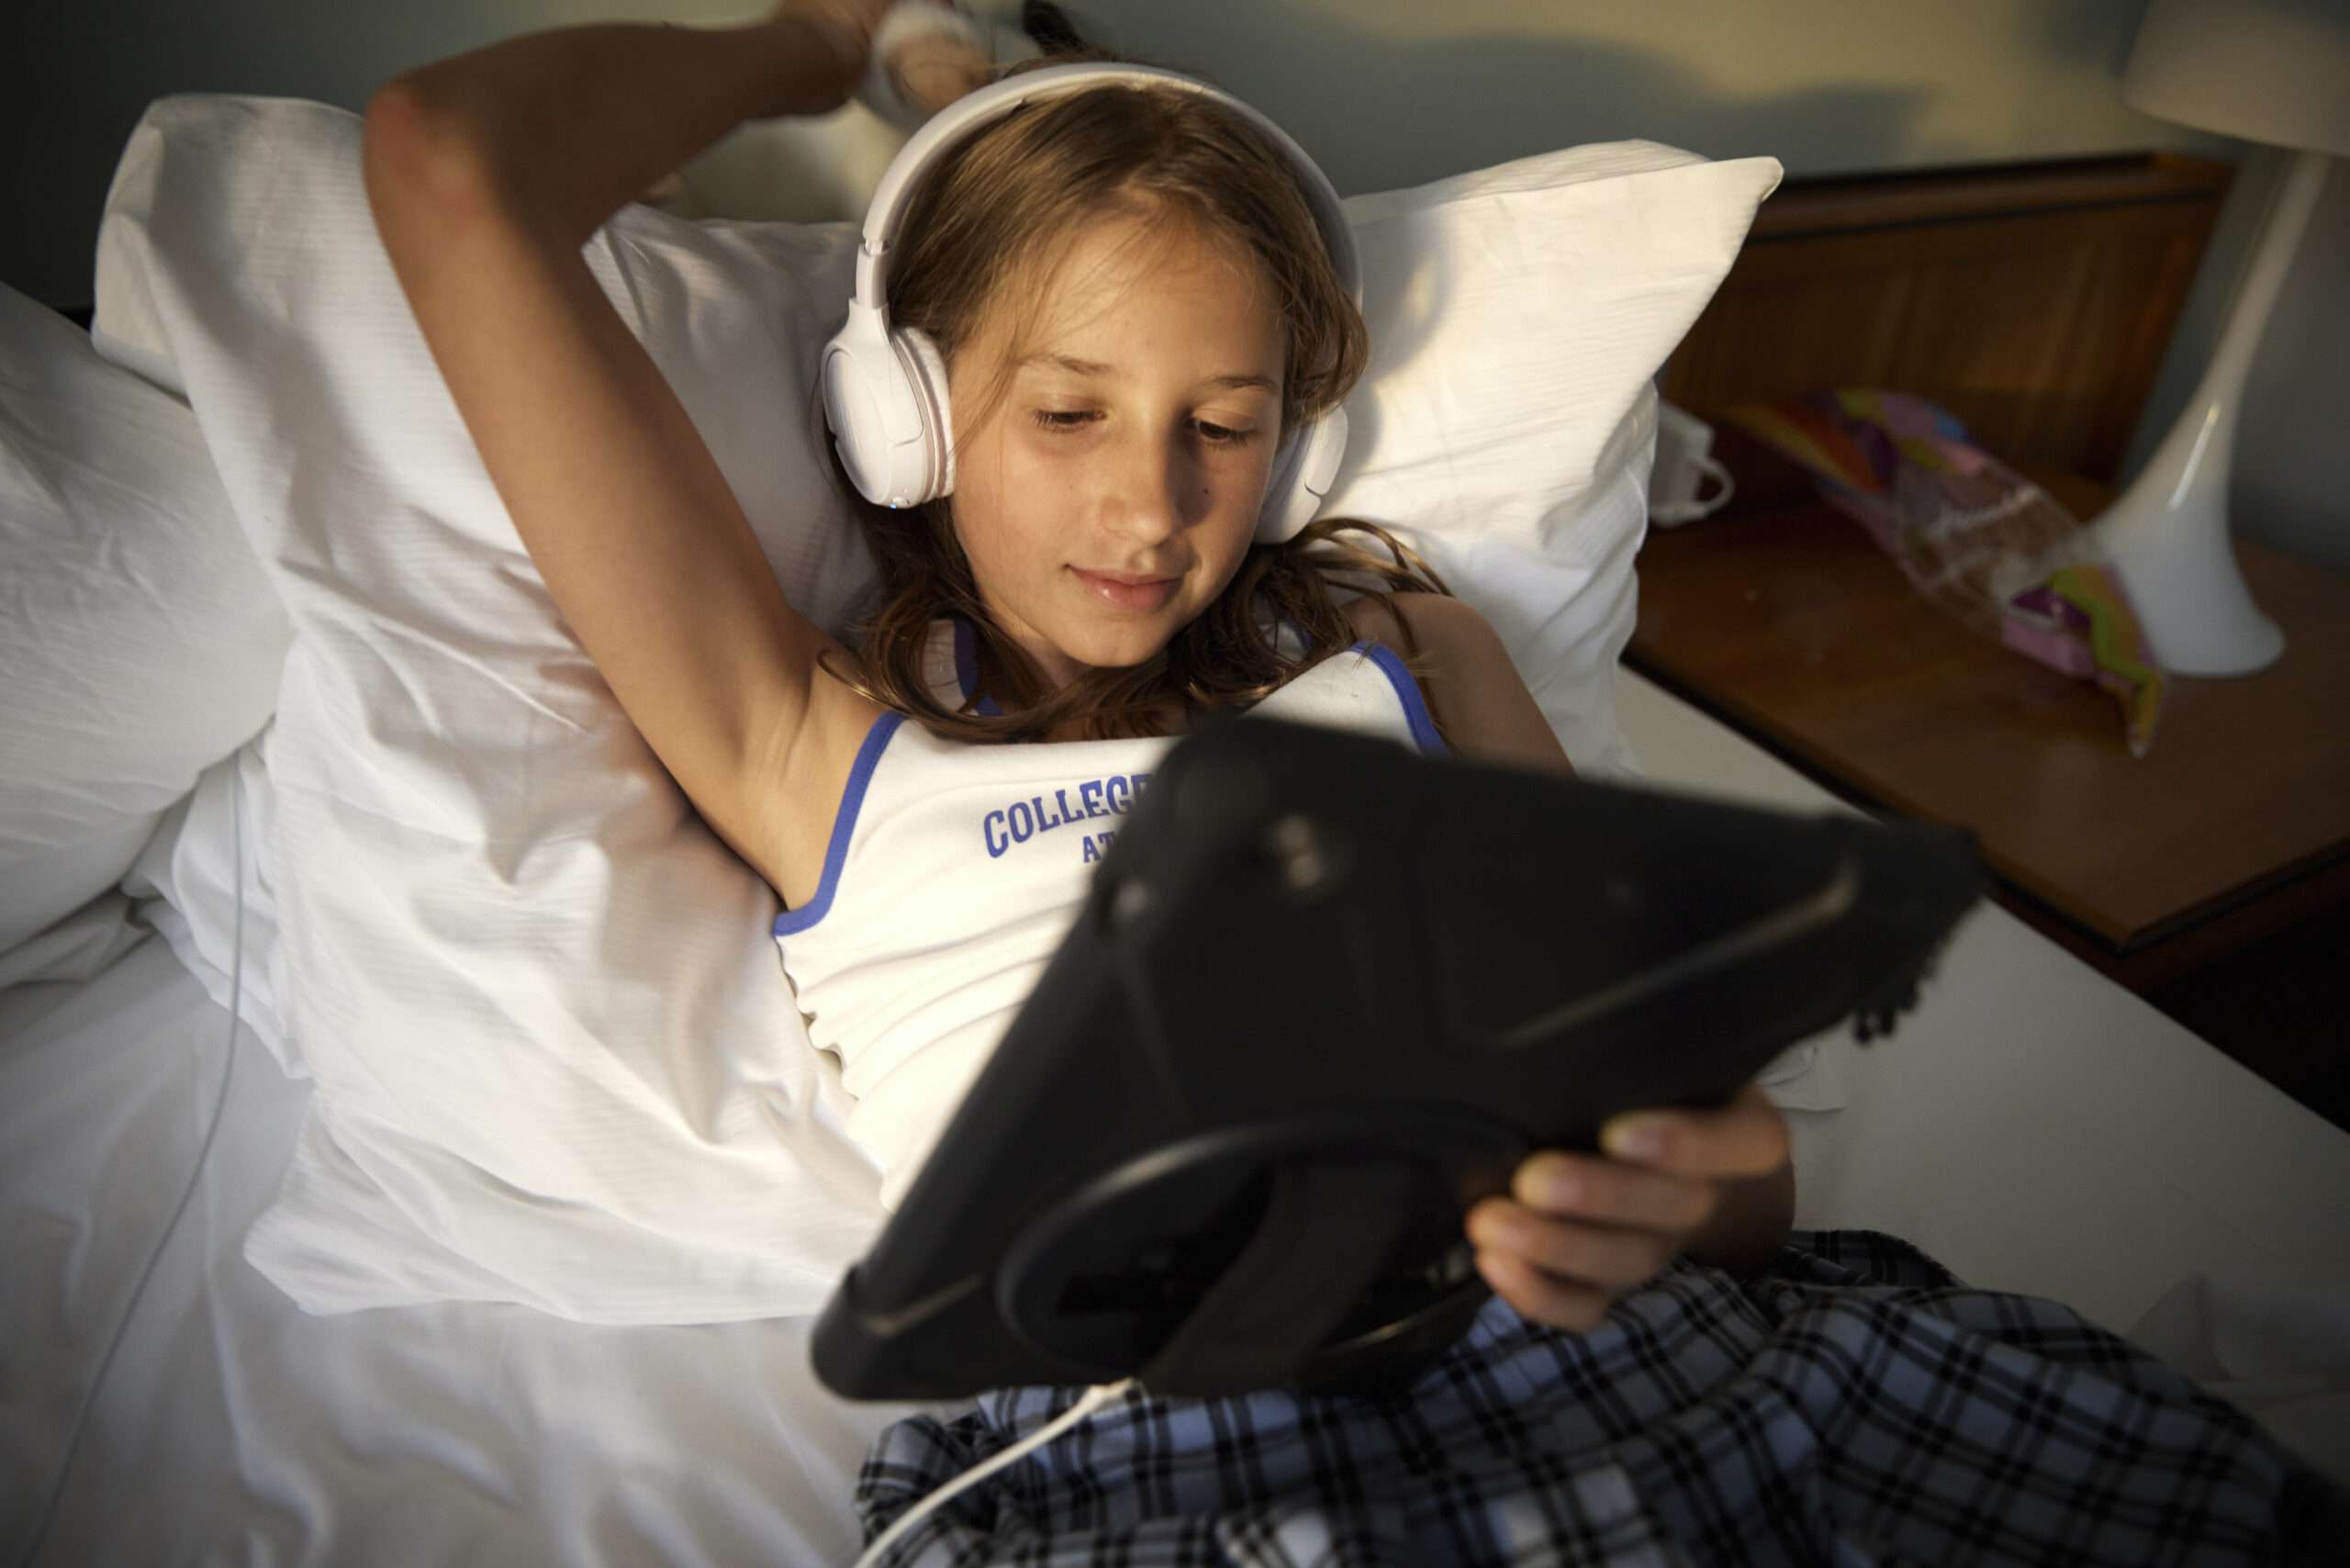 The Kids Online Safety Act would make it less safe online